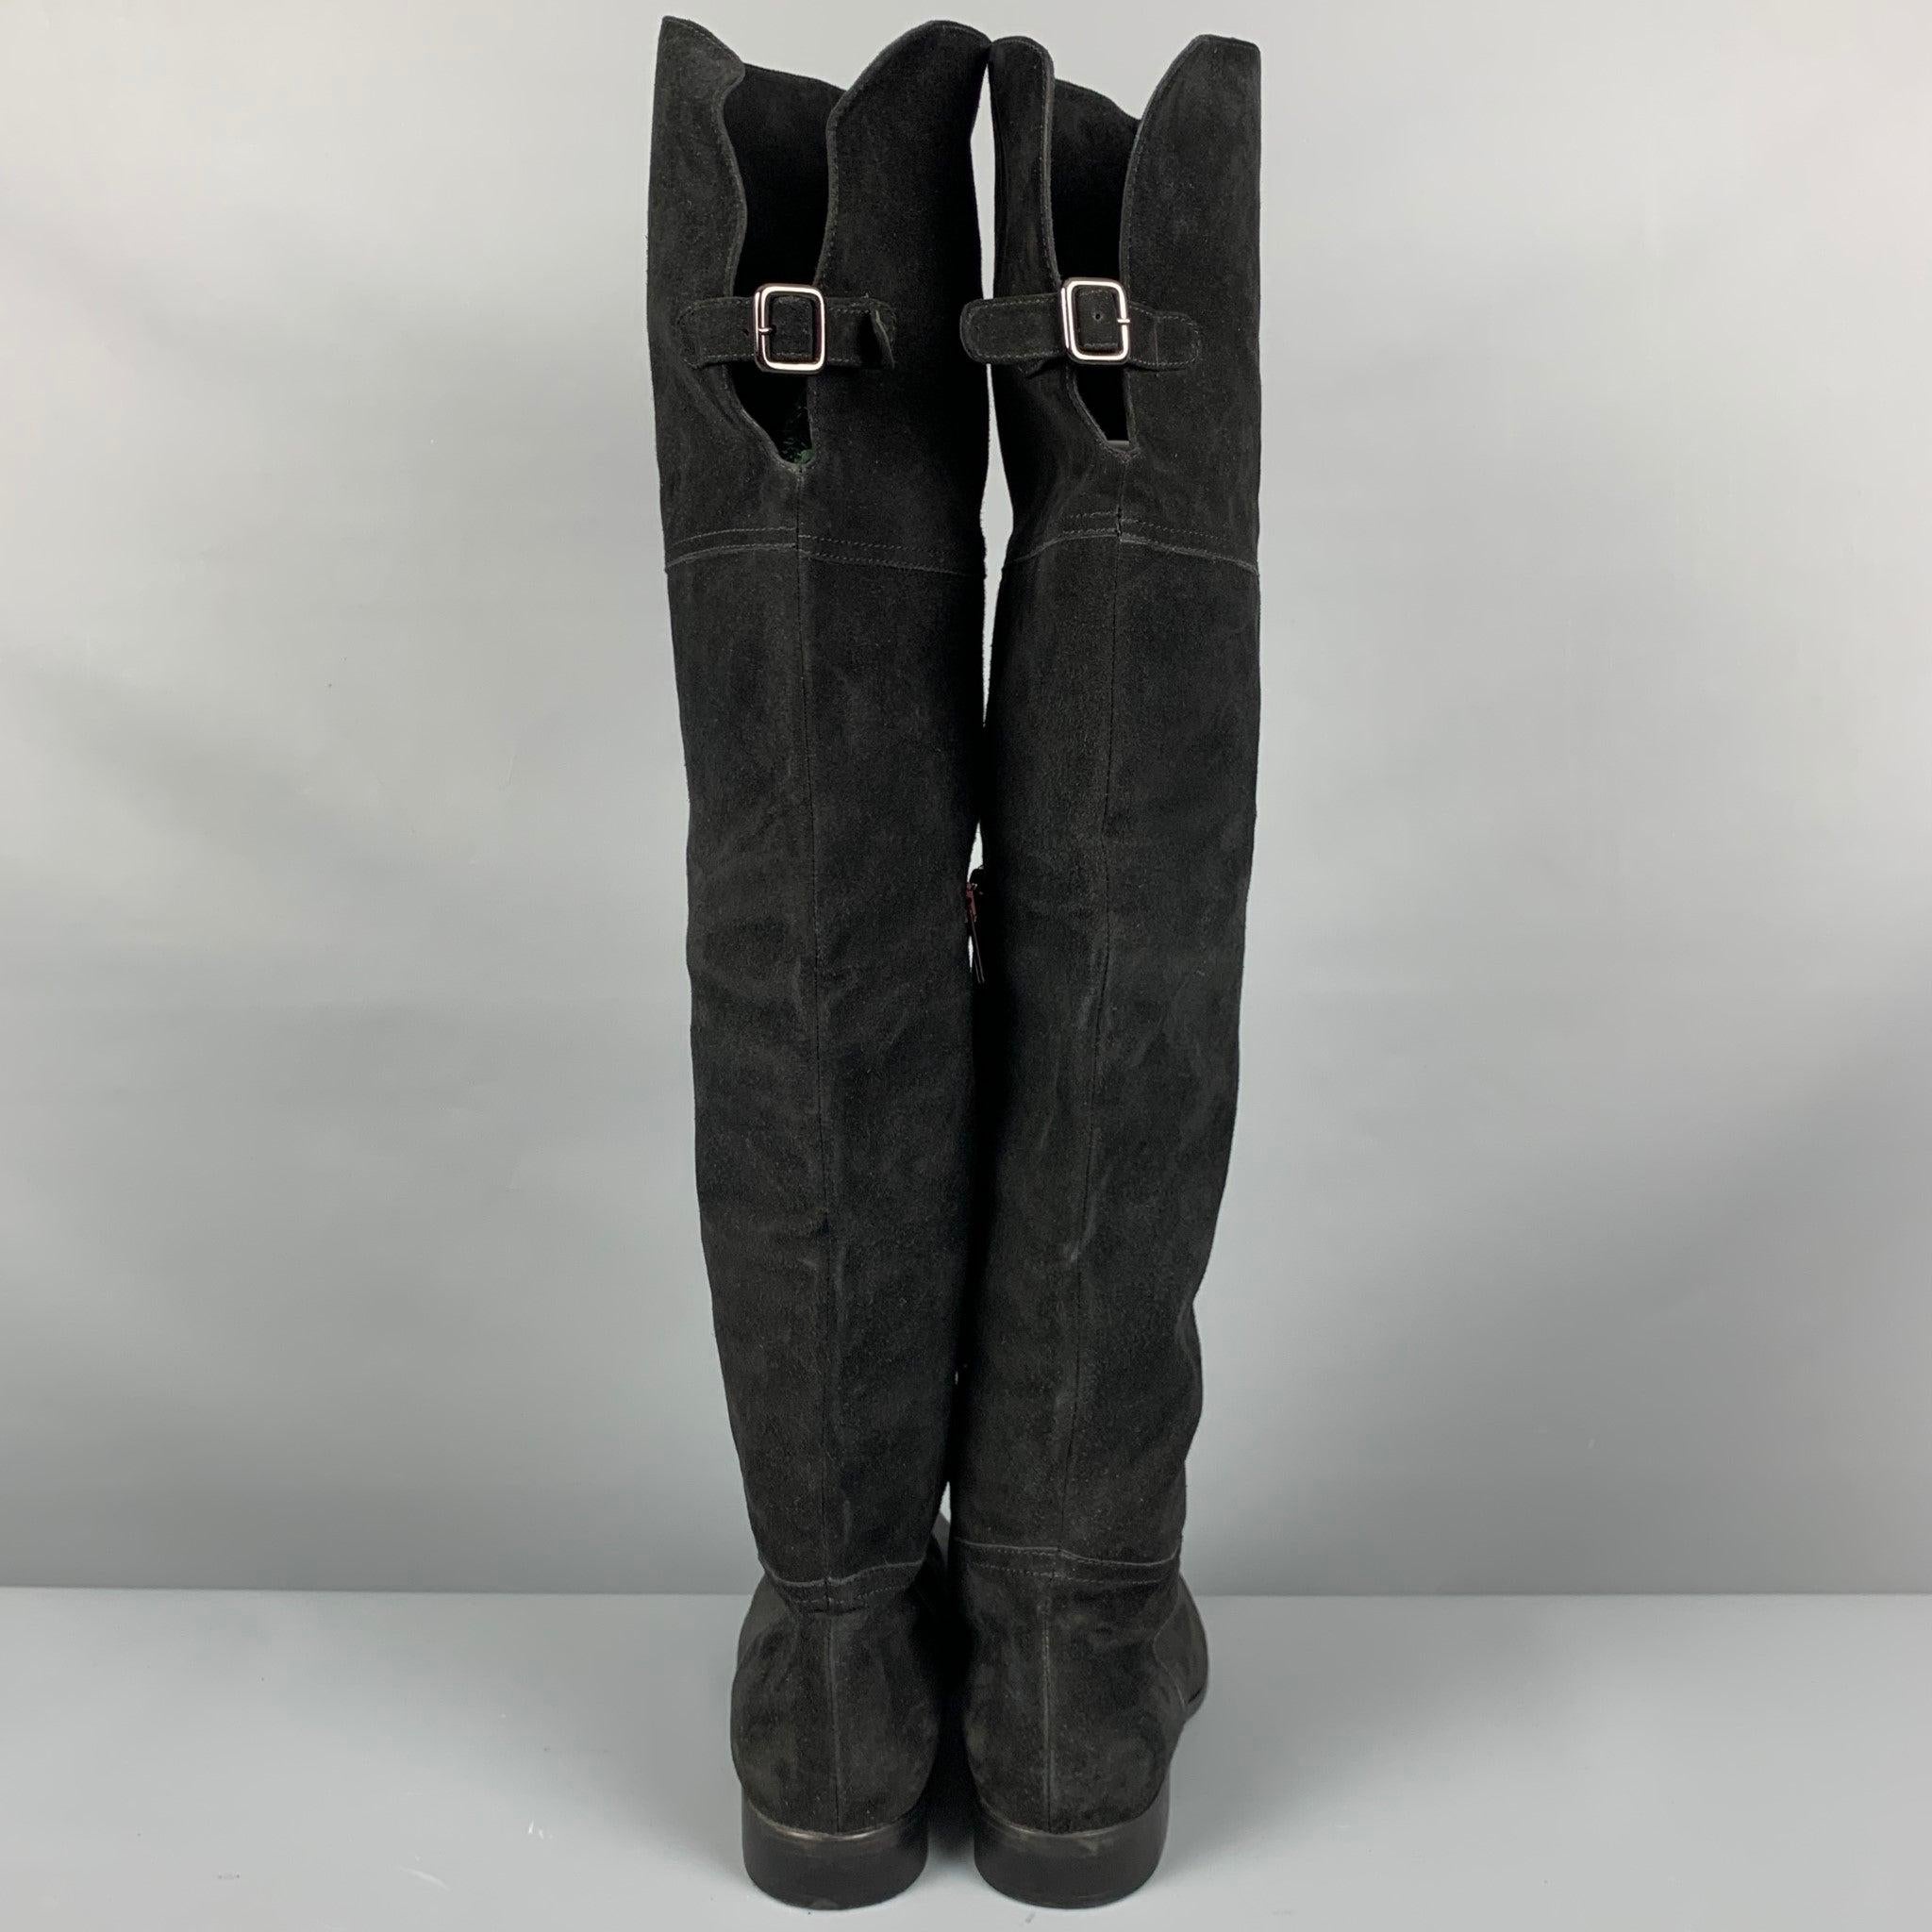 AQUATALIA Size 9.5 Black Suede Boots In Good Condition For Sale In San Francisco, CA